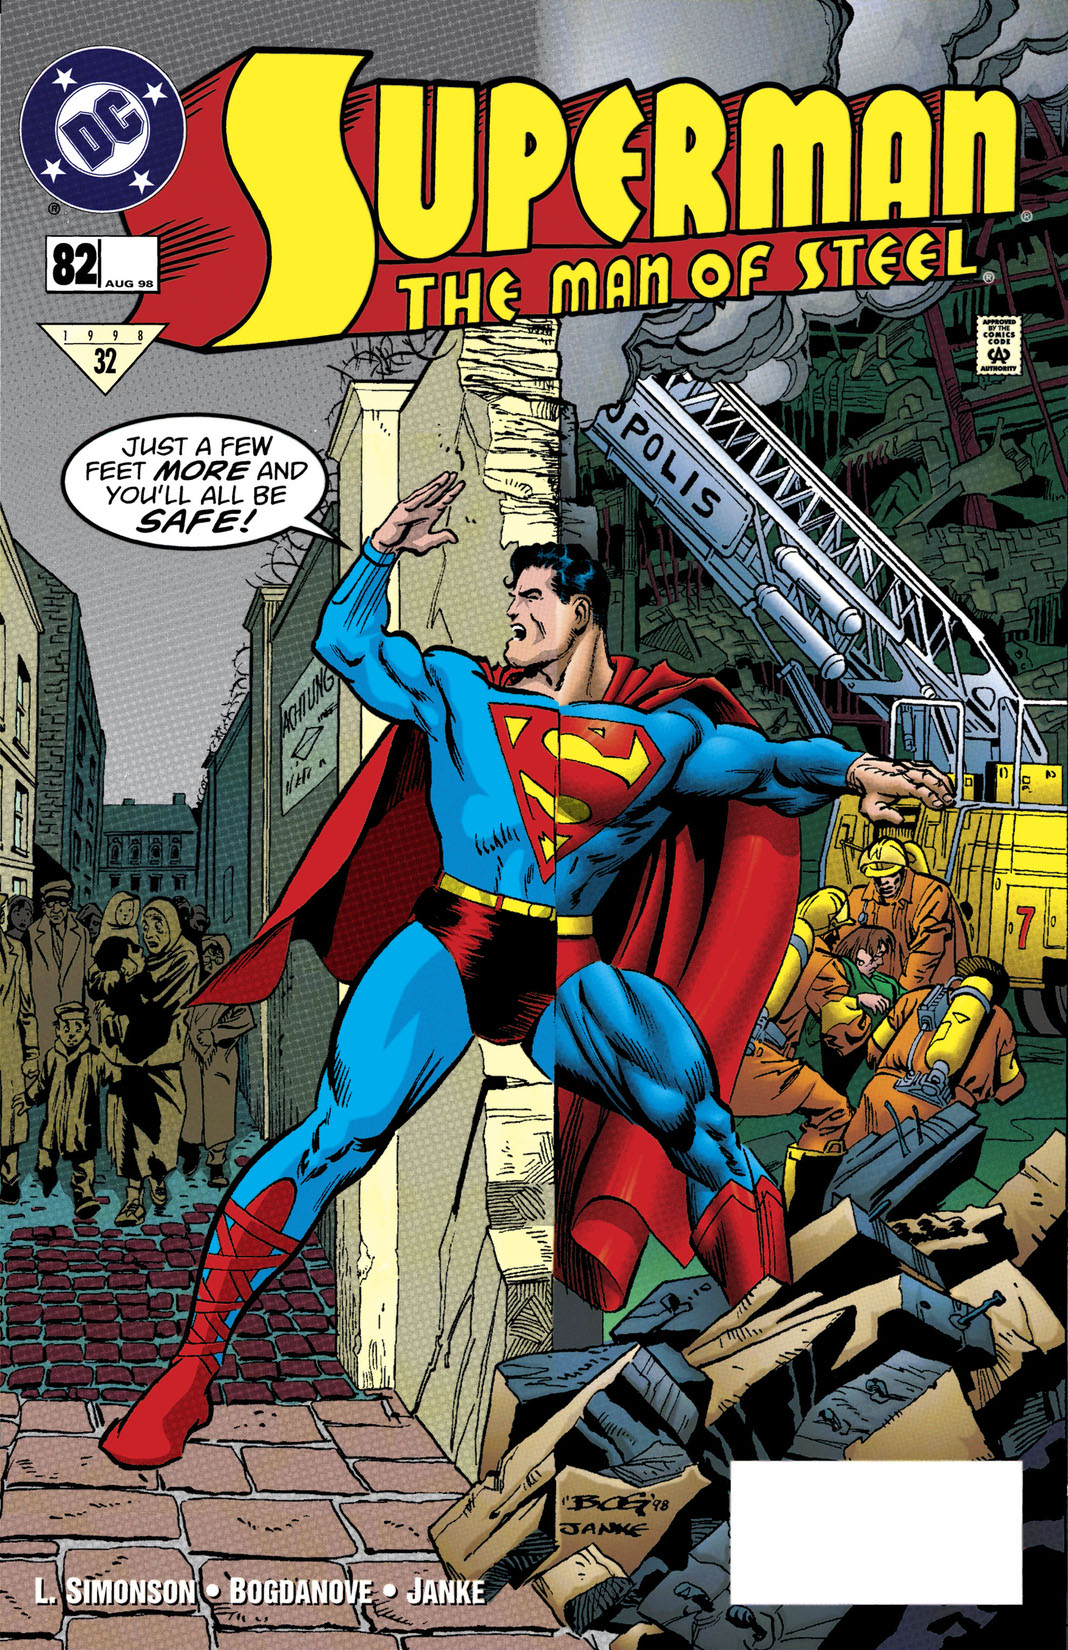 Superman: The Man of Steel #82 preview images